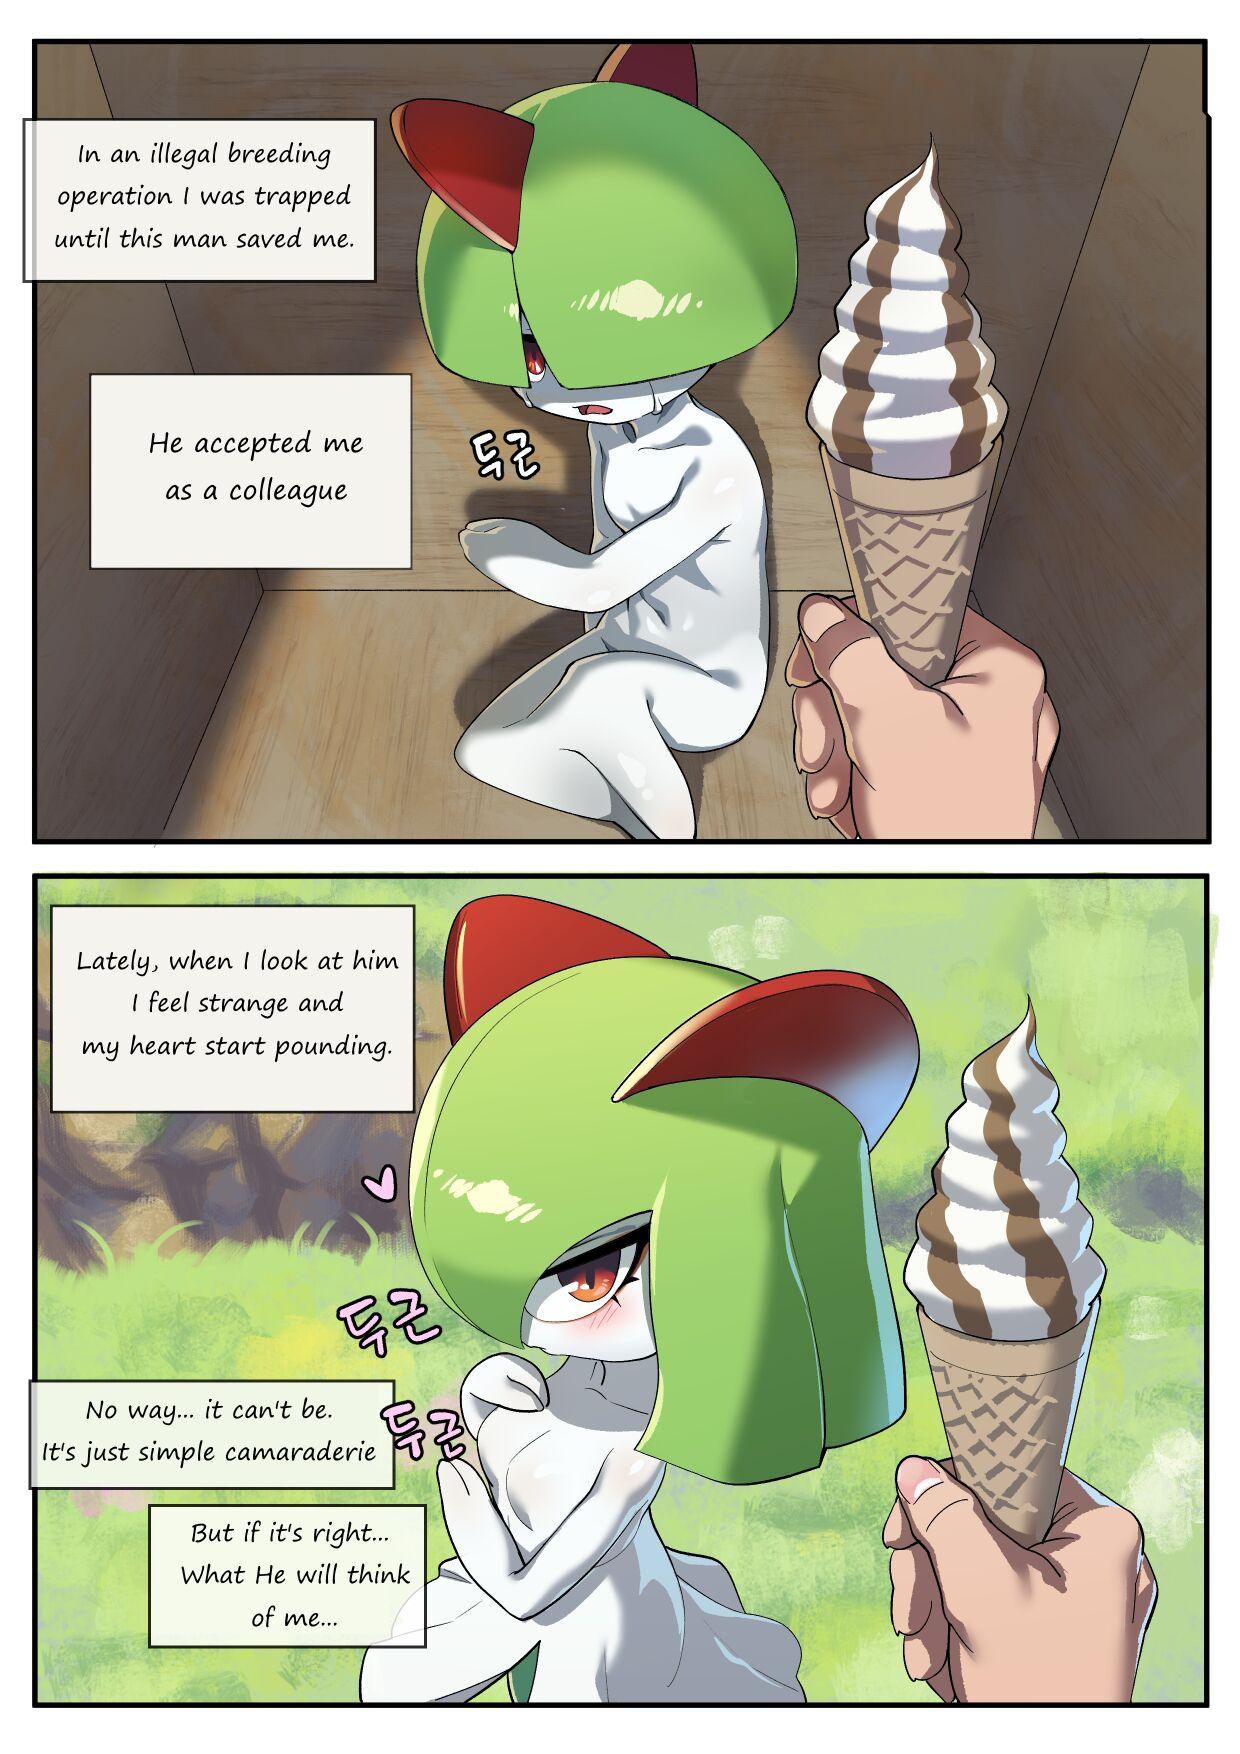 Fantasy The Gardevior that loved her trainer too much - Pokemon | pocket monsters Bdsm - Page 1